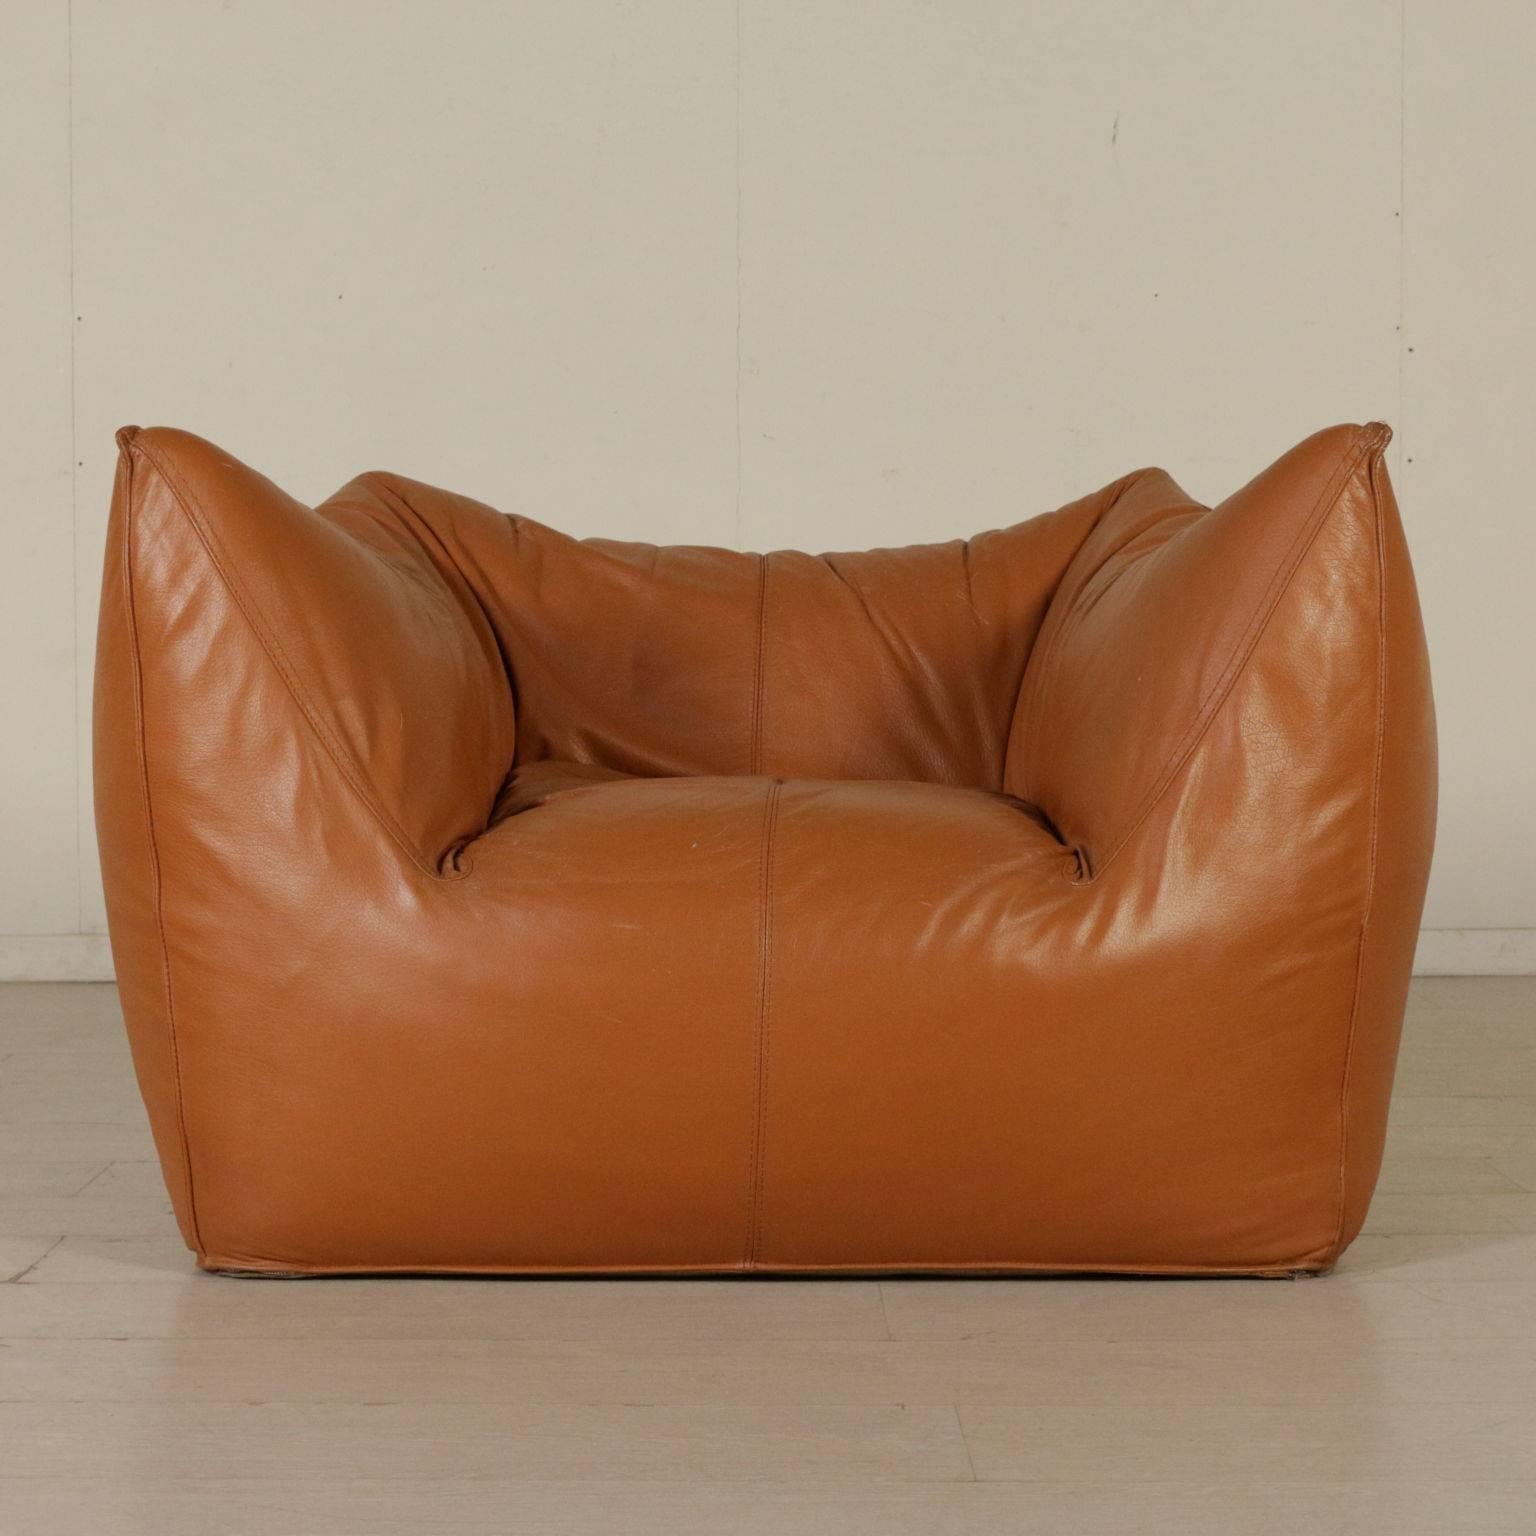 An armchair designed by Mario Bellini (1935) for B&B, foam padding, leather upholstery. Model: Le bambole. Manufactured in Italy, 1970s-1980s.